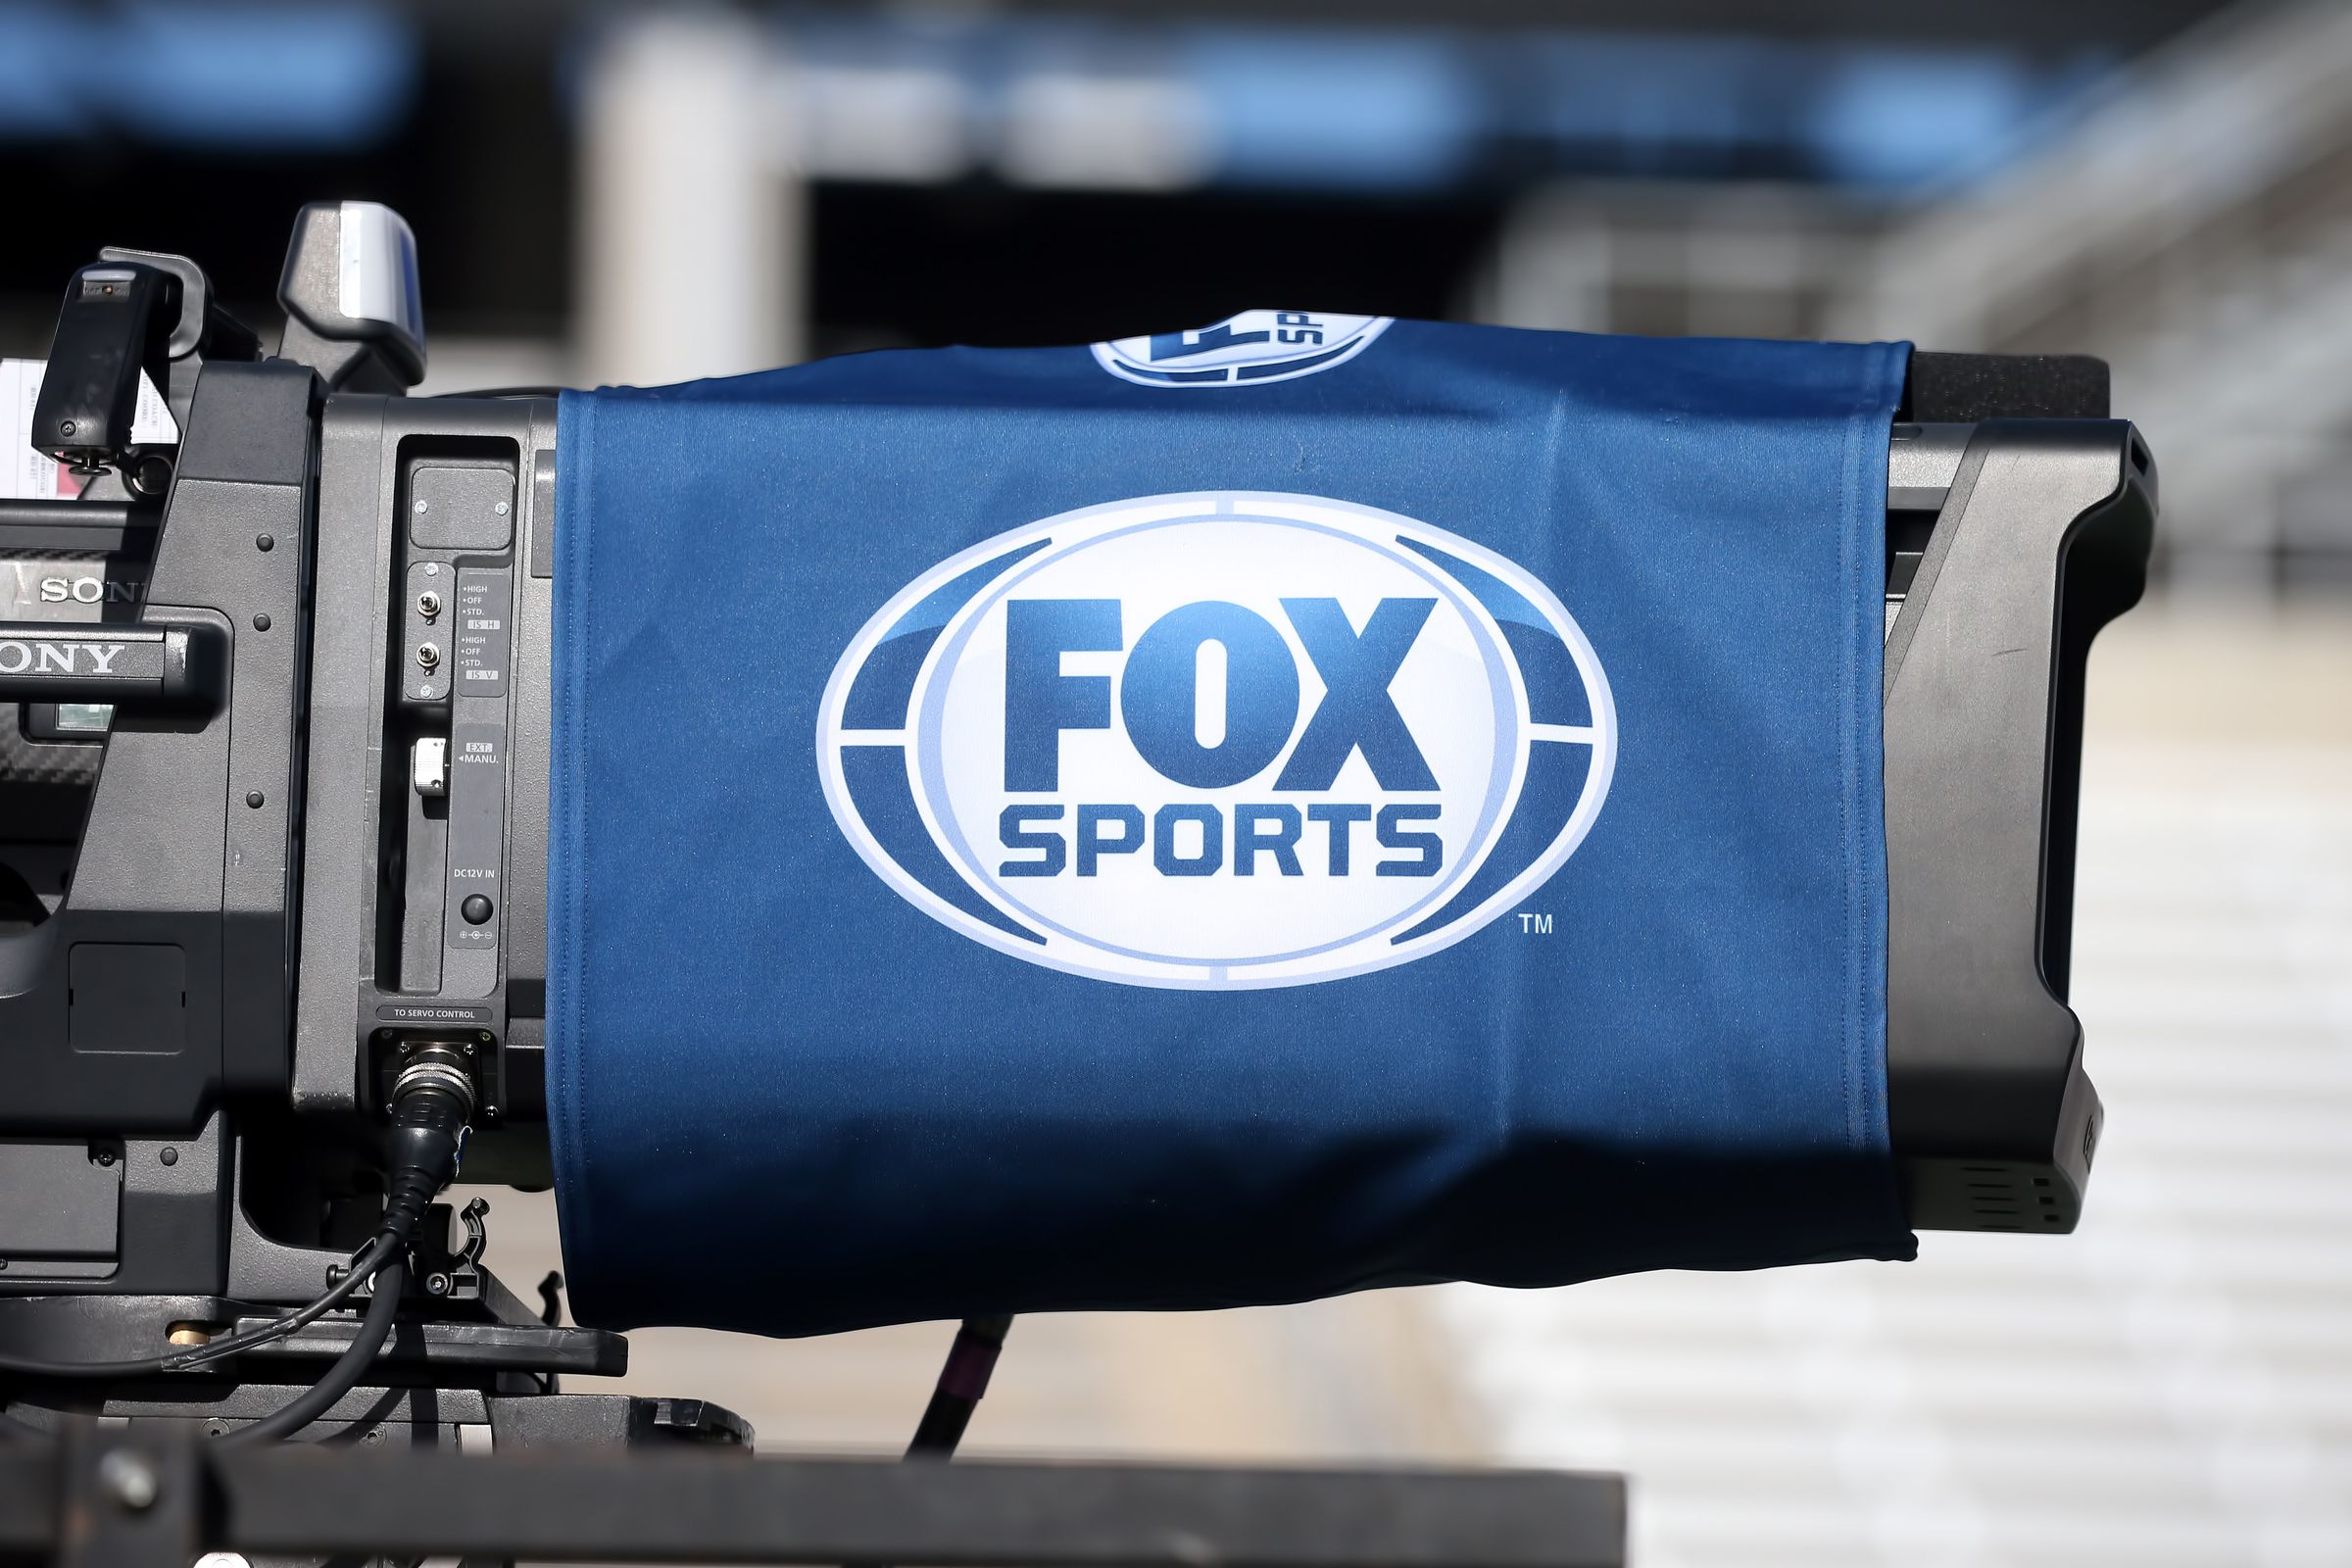 And image of the Fox Sports logo on a broadcast camera lens.